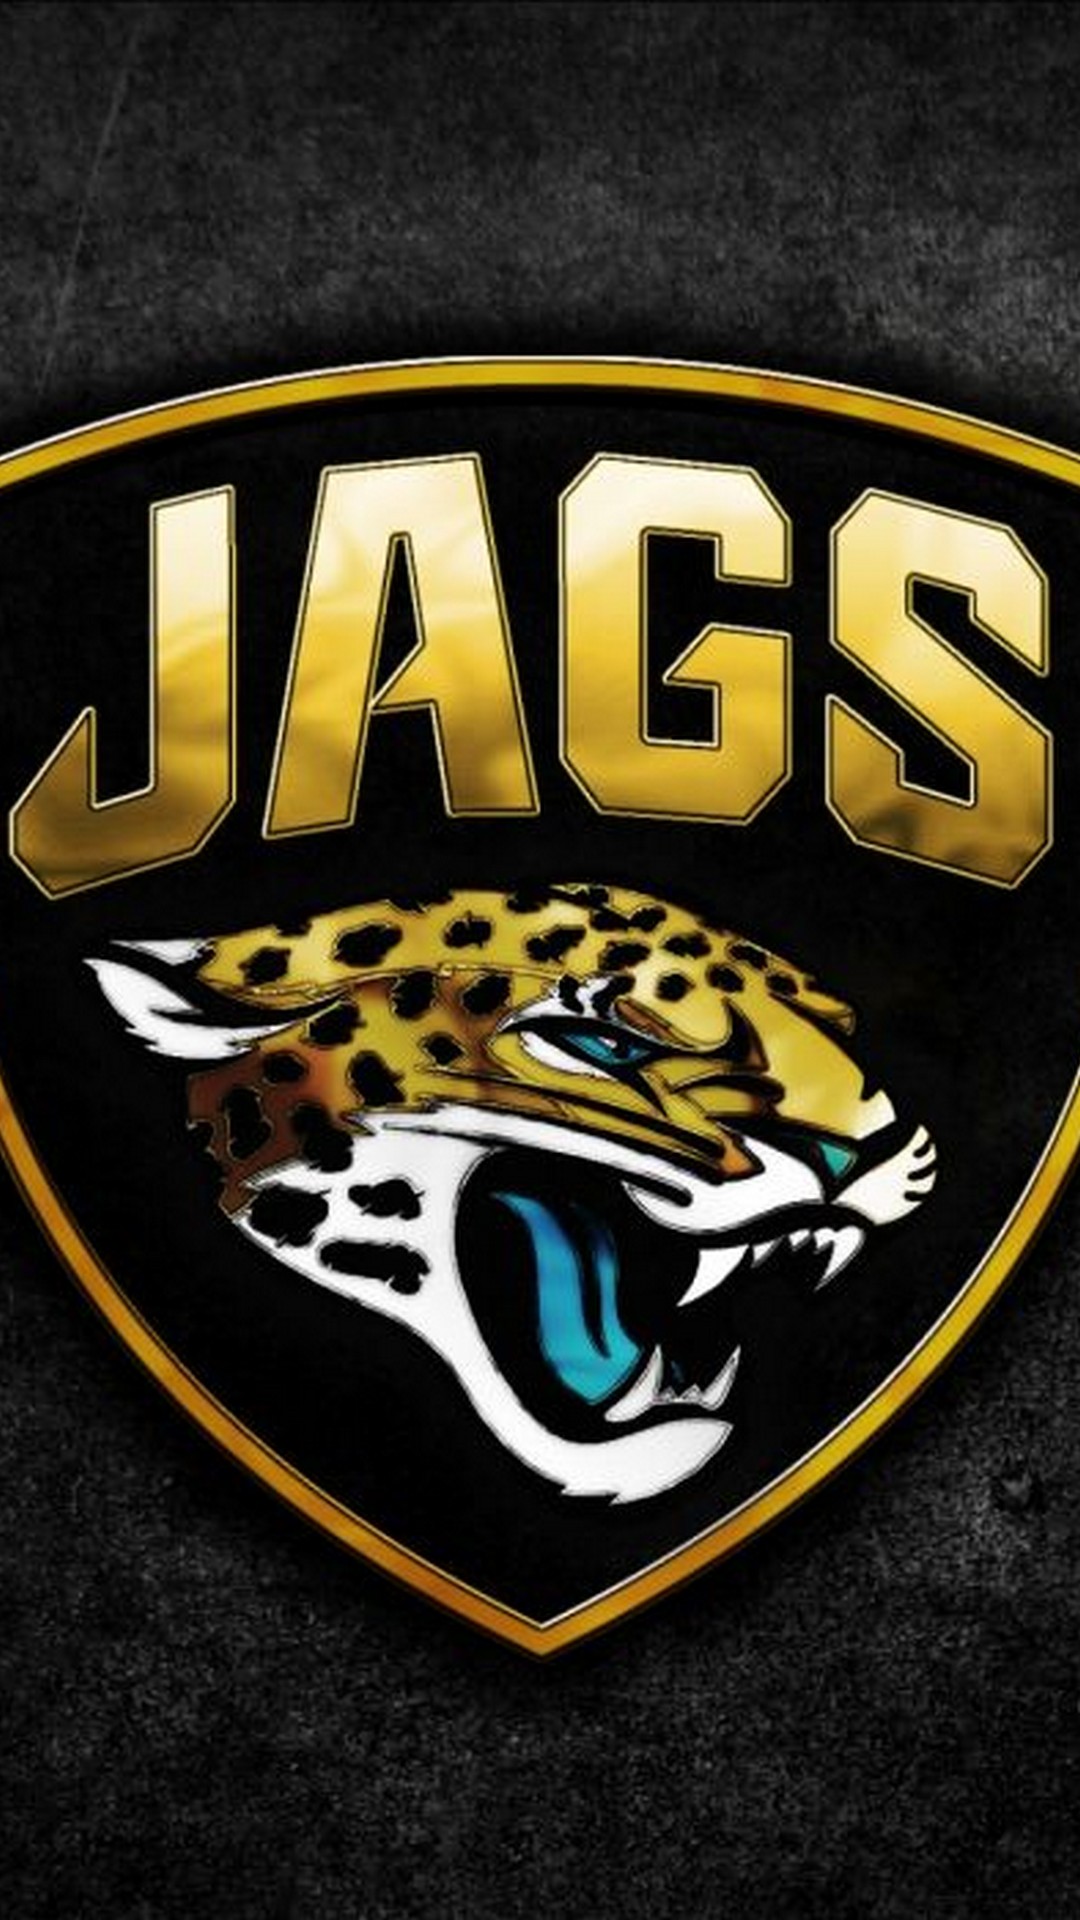 Jacksonville Jaguars iPhone X Wallpaper with high-resolution 1080x1920 pixel. You can use this wallpaper for your Mac or Windows Desktop Background, iPhone, Android or Tablet and another Smartphone device